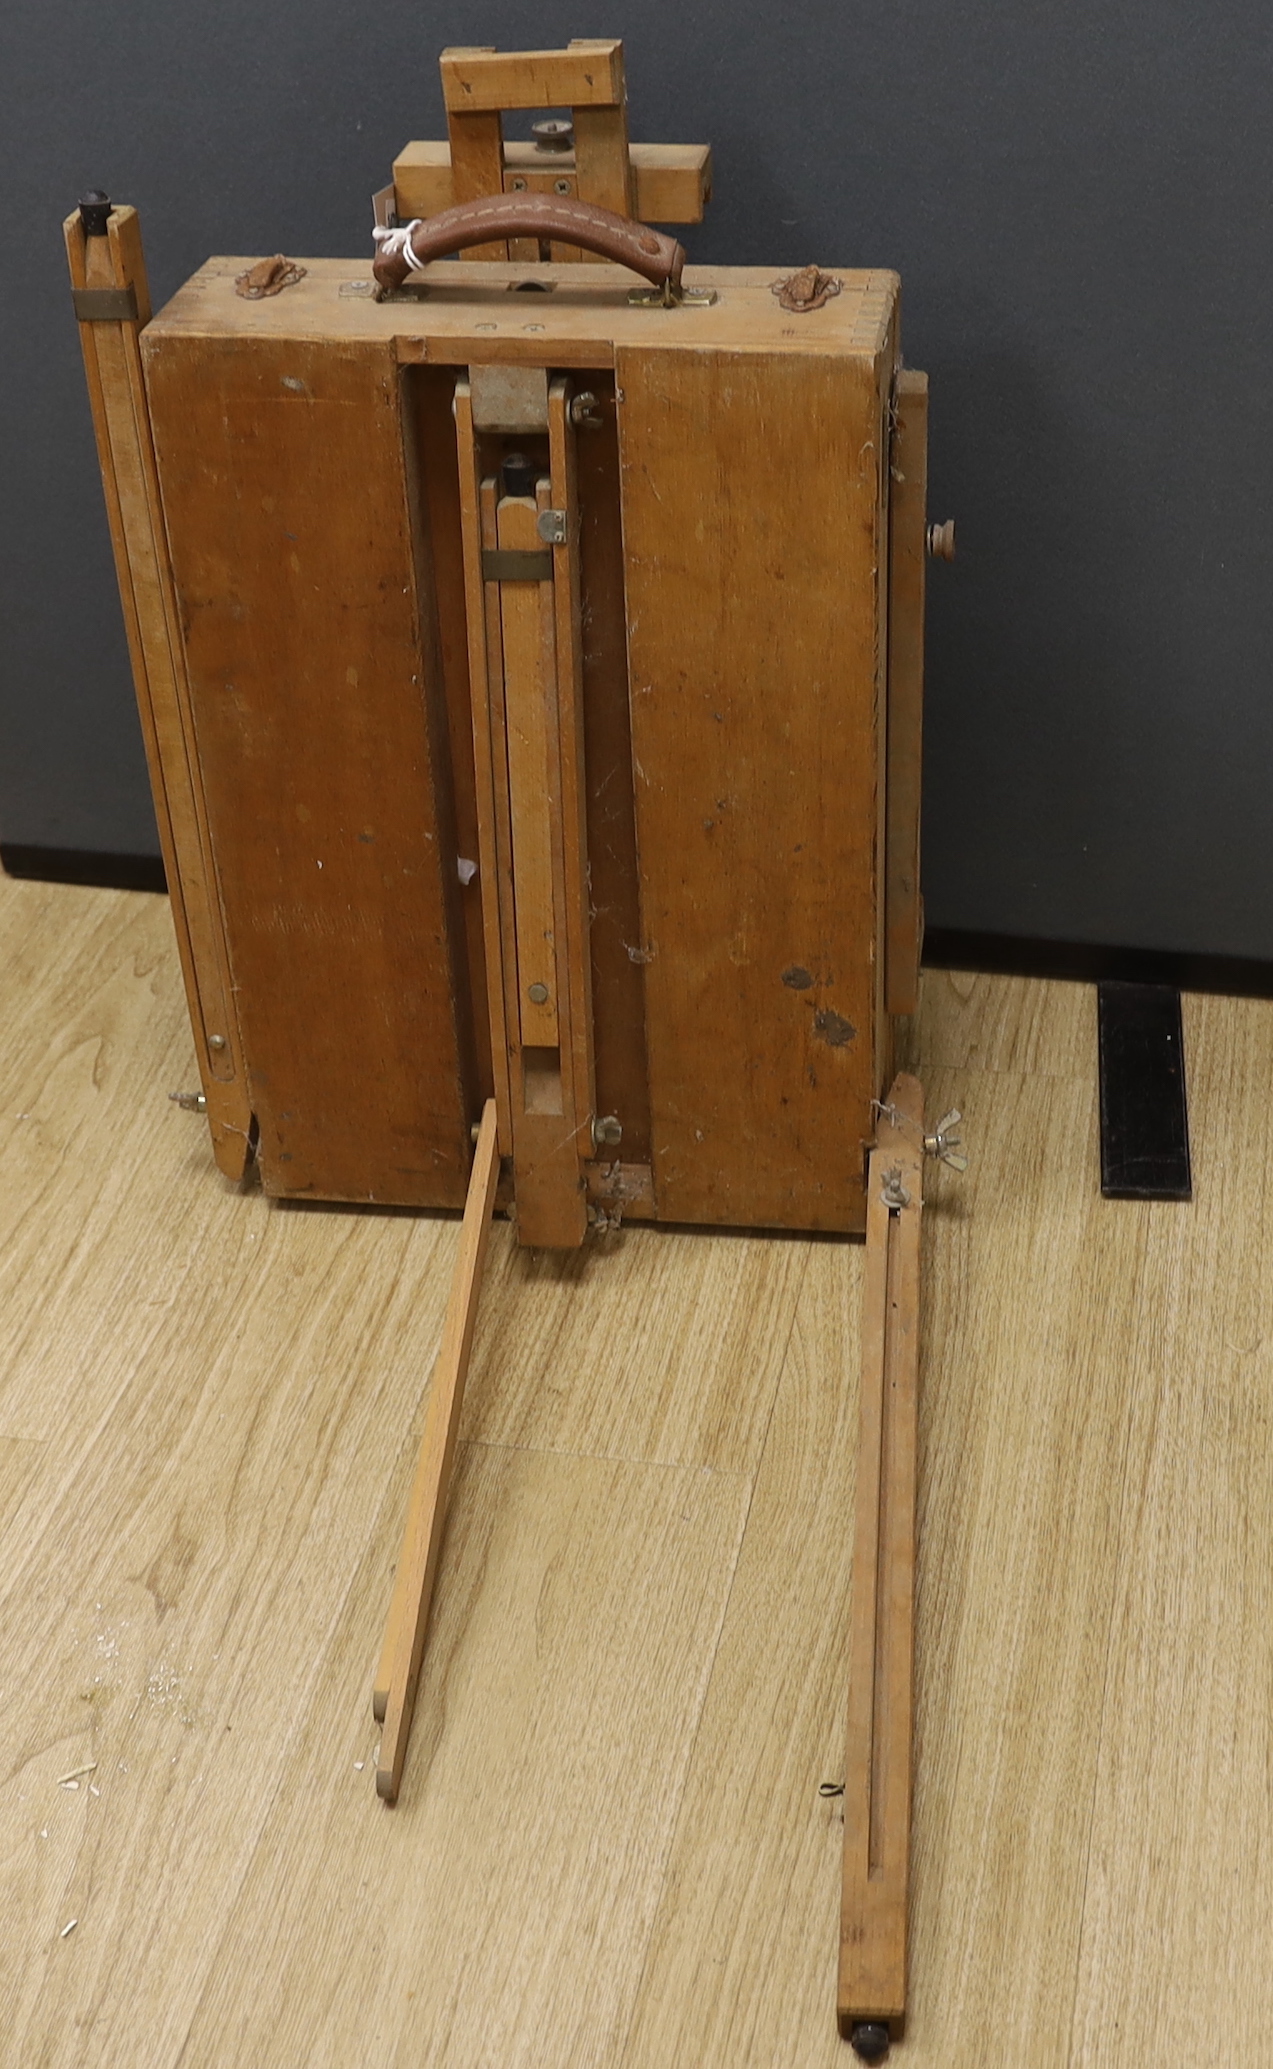 A travelling easel stamped ‘M abef made in Italy’